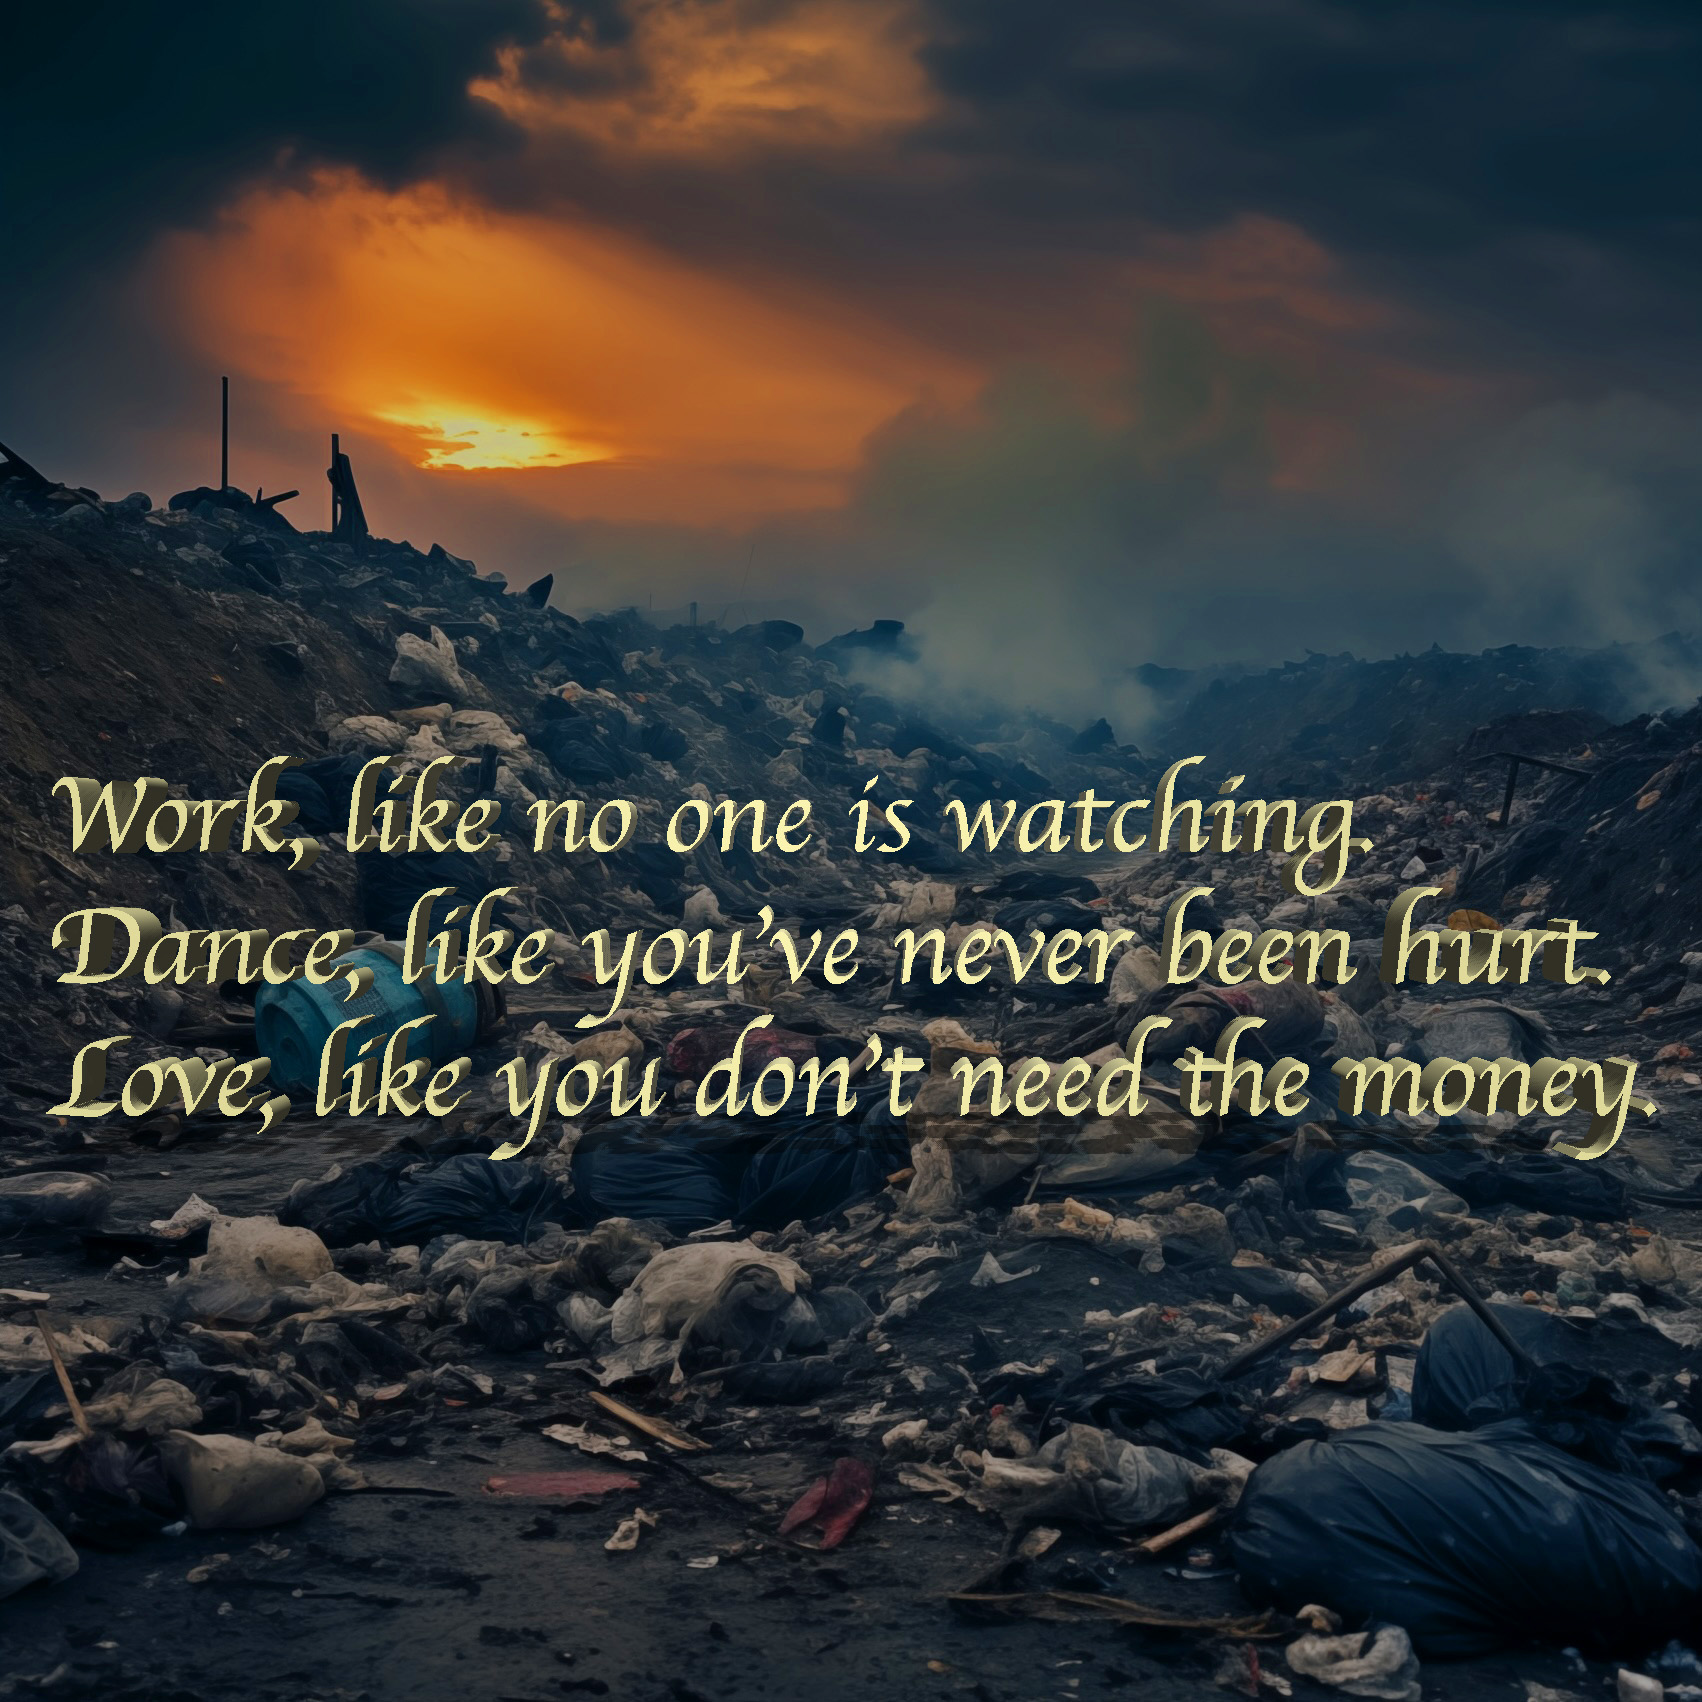 Depressing quote over an image of a desolate garbage dump with a dramatic sunset. "Work like no one is watching. Dance, like you've never been hurt. Love, like you don't need the money."